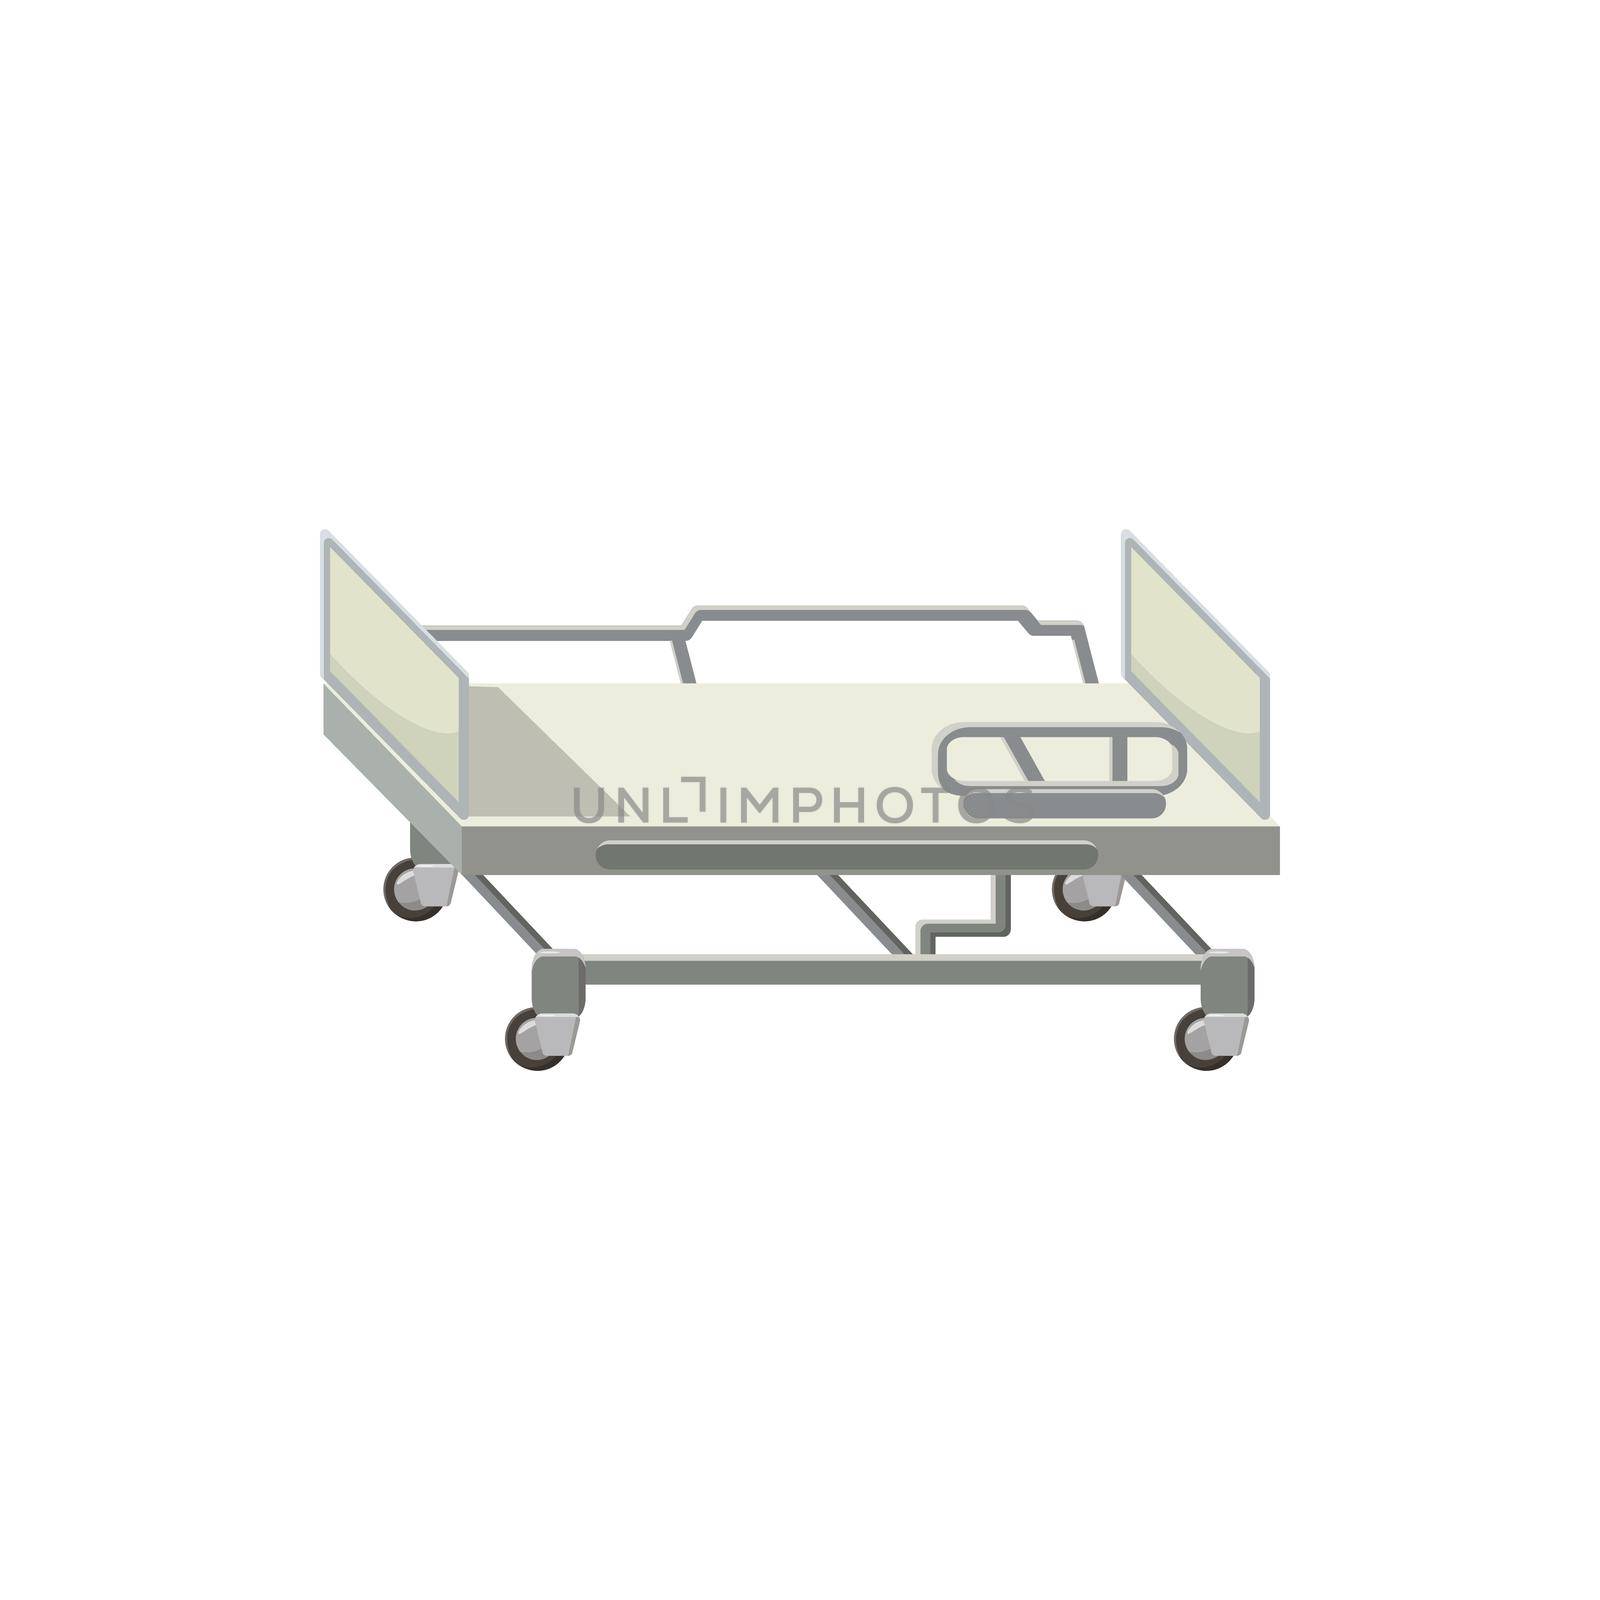 Mobile medical bed icon, cartoon style by ylivdesign